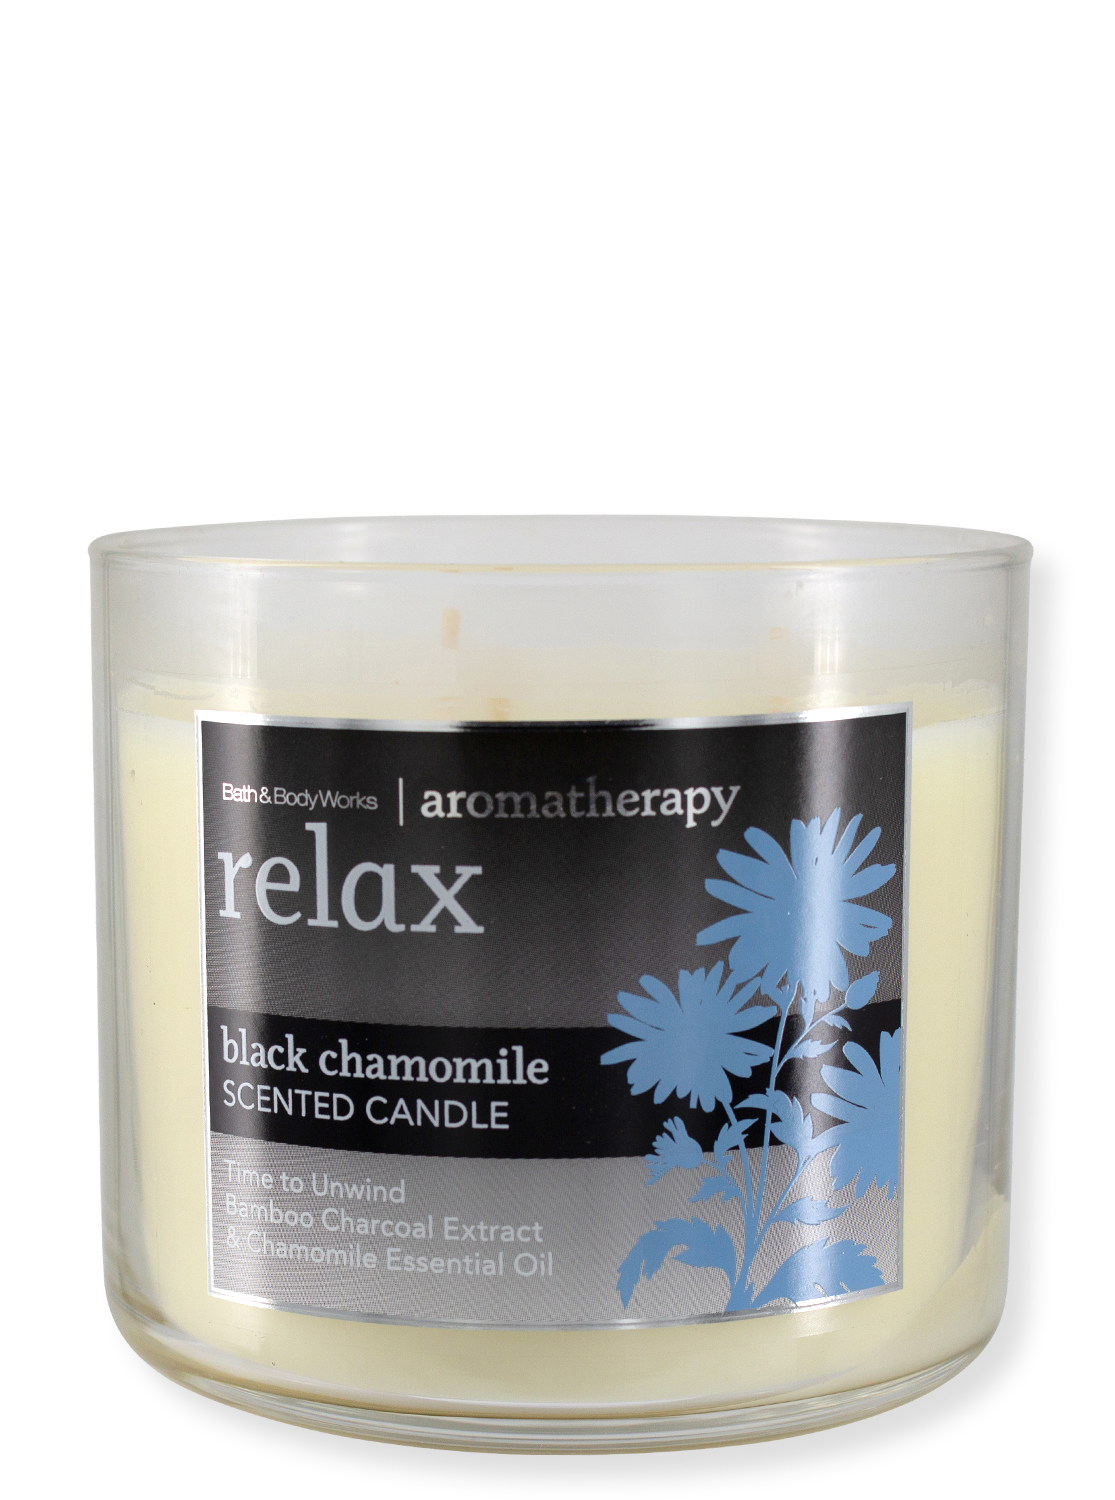 Rarity - aromatherapy - 3 -butt candle - relax - black chamomile - 411g